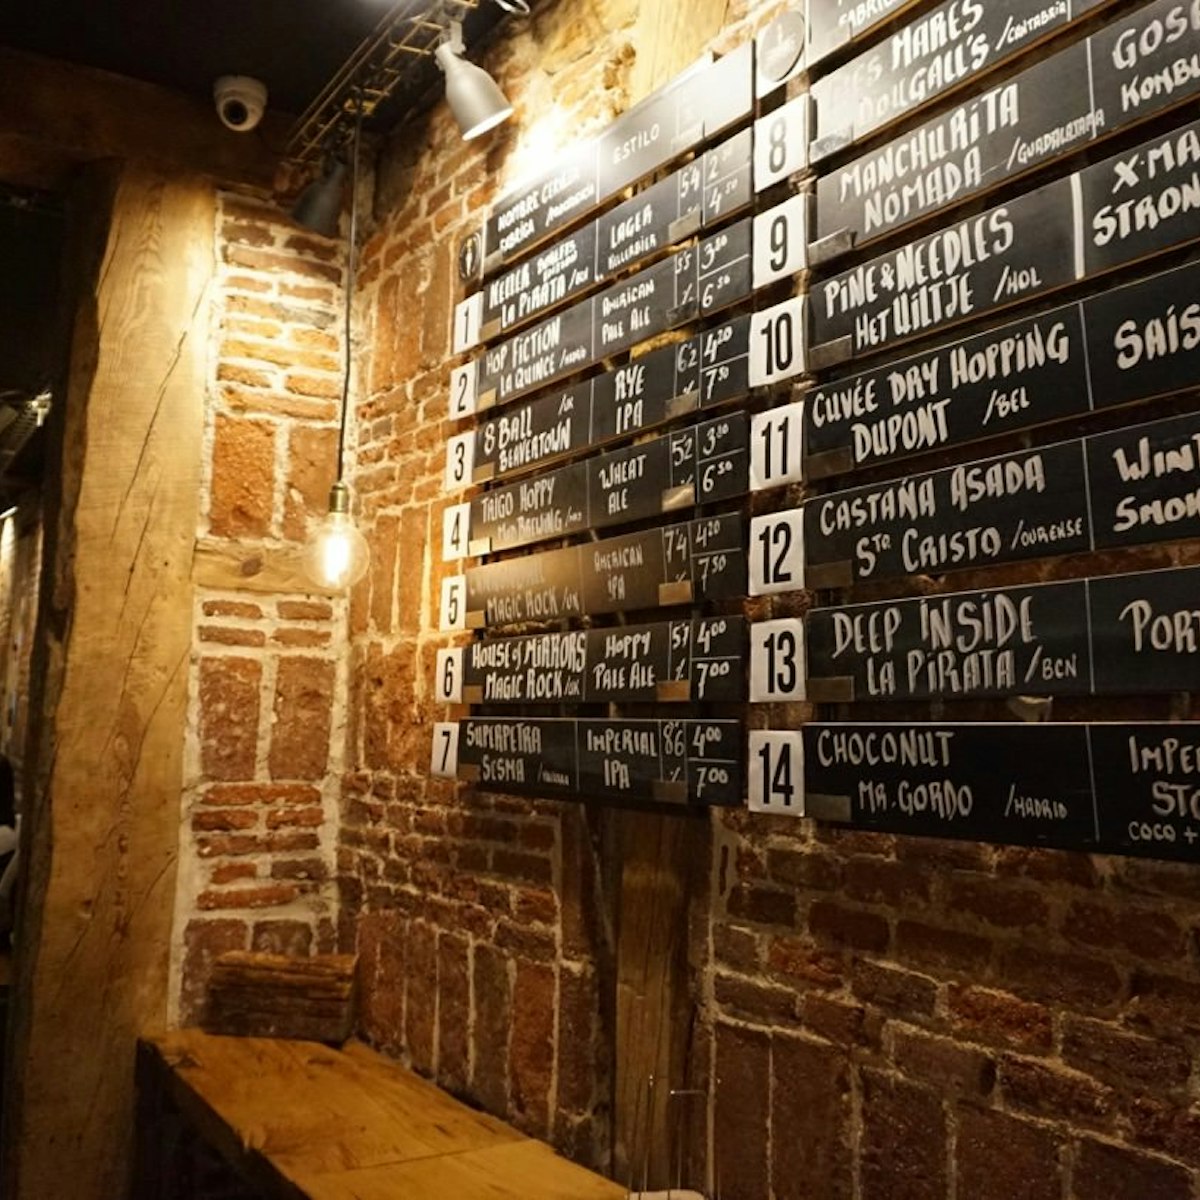 The list of beers on tap at The Stuyck Co